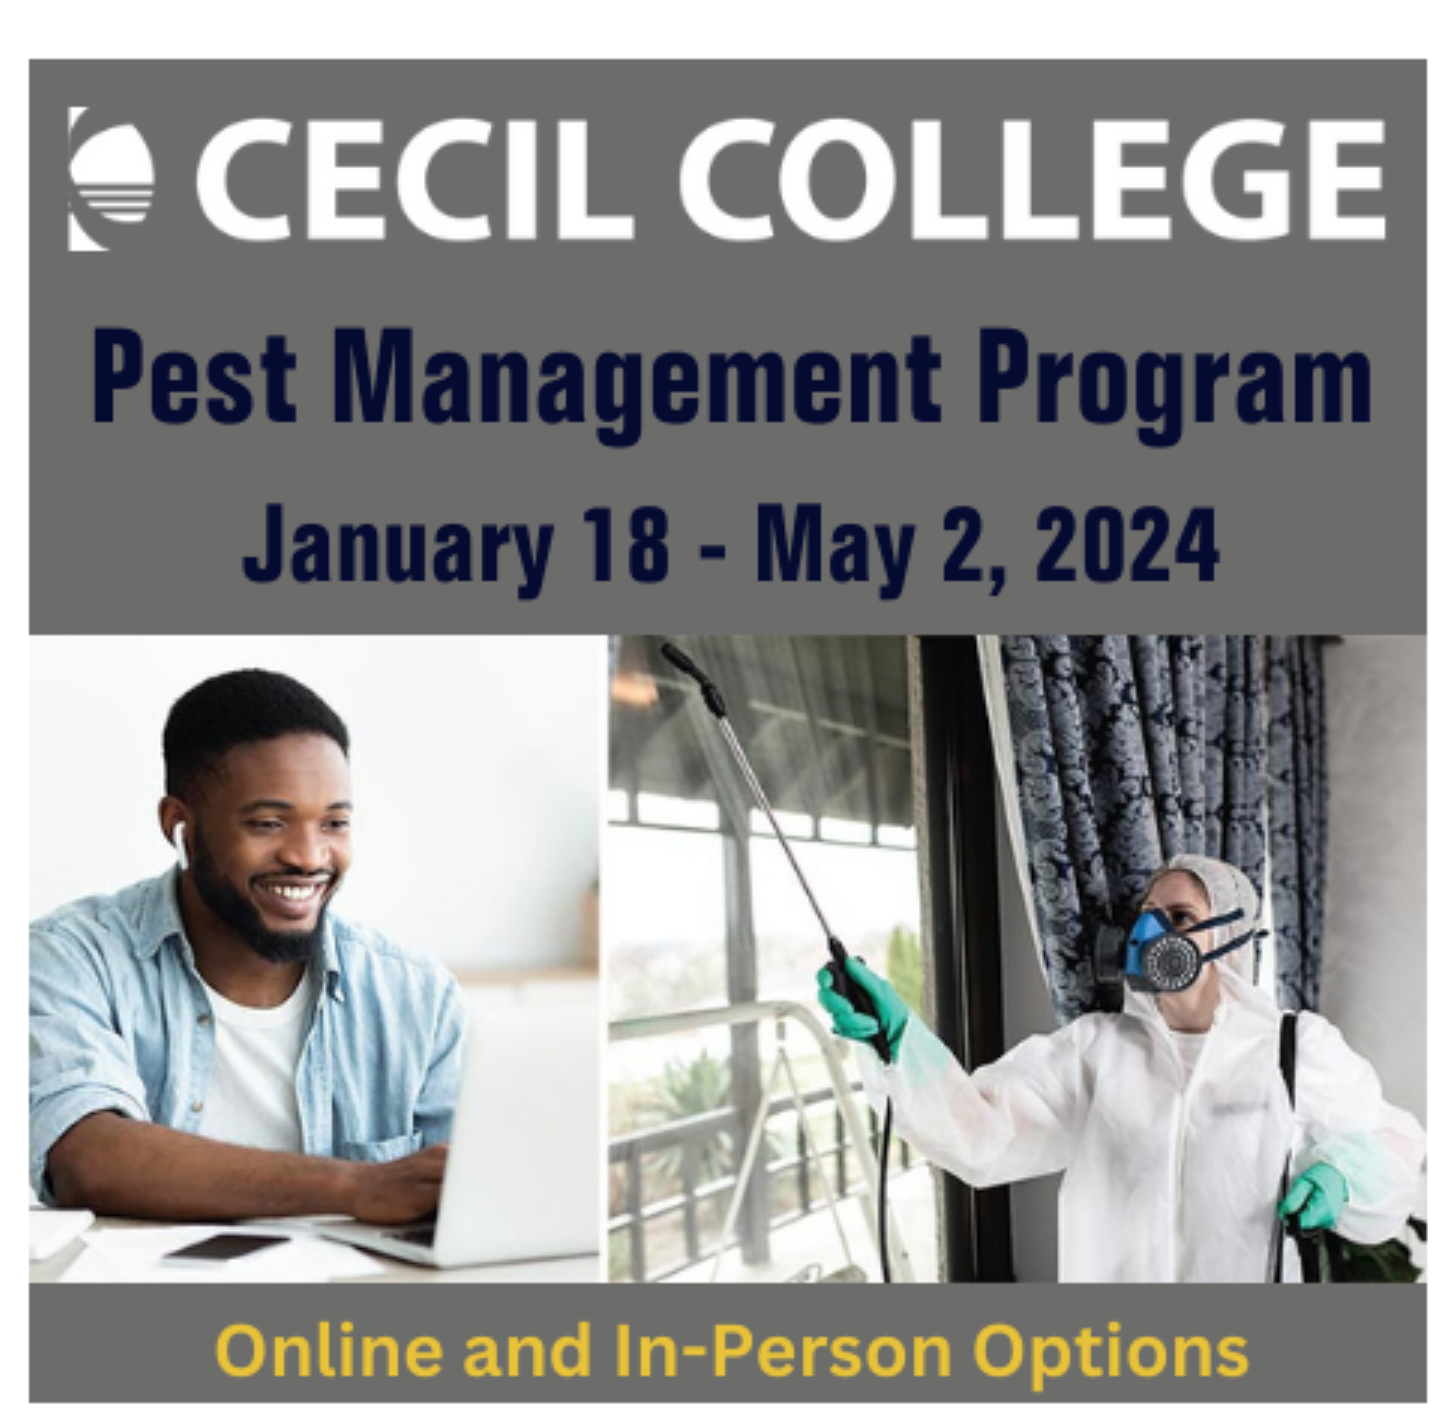 Technician Training Available through Cecil College